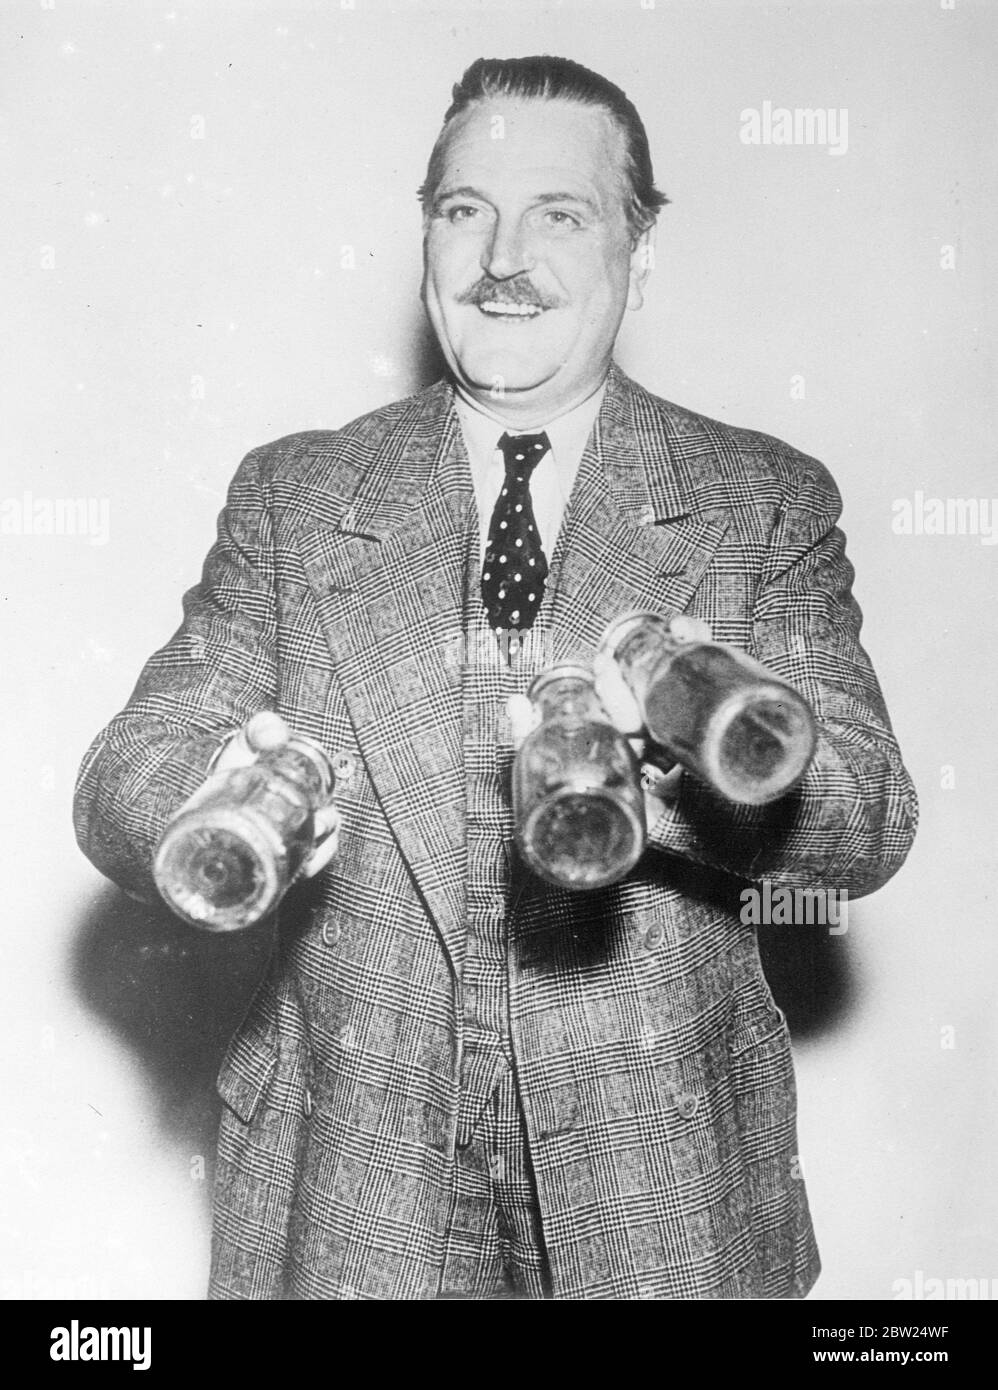 Film actor turns conjuror and gets a surprise. Using three empty milk bottles, and a lot of hope, Frank Morgan, one of Hollywood's best feature players who is famous for the jovial types, he portrays on the screen, set out to entertain his friends with a juggling act. His confidence was misplaced, however, for he lost control of a bottle and only found it when it hits him on the head. Photo shows, Frank Morgan with a smile of extreme confidence, gaily steps up with his three milk bottles to amuse his friends. Stock Photo